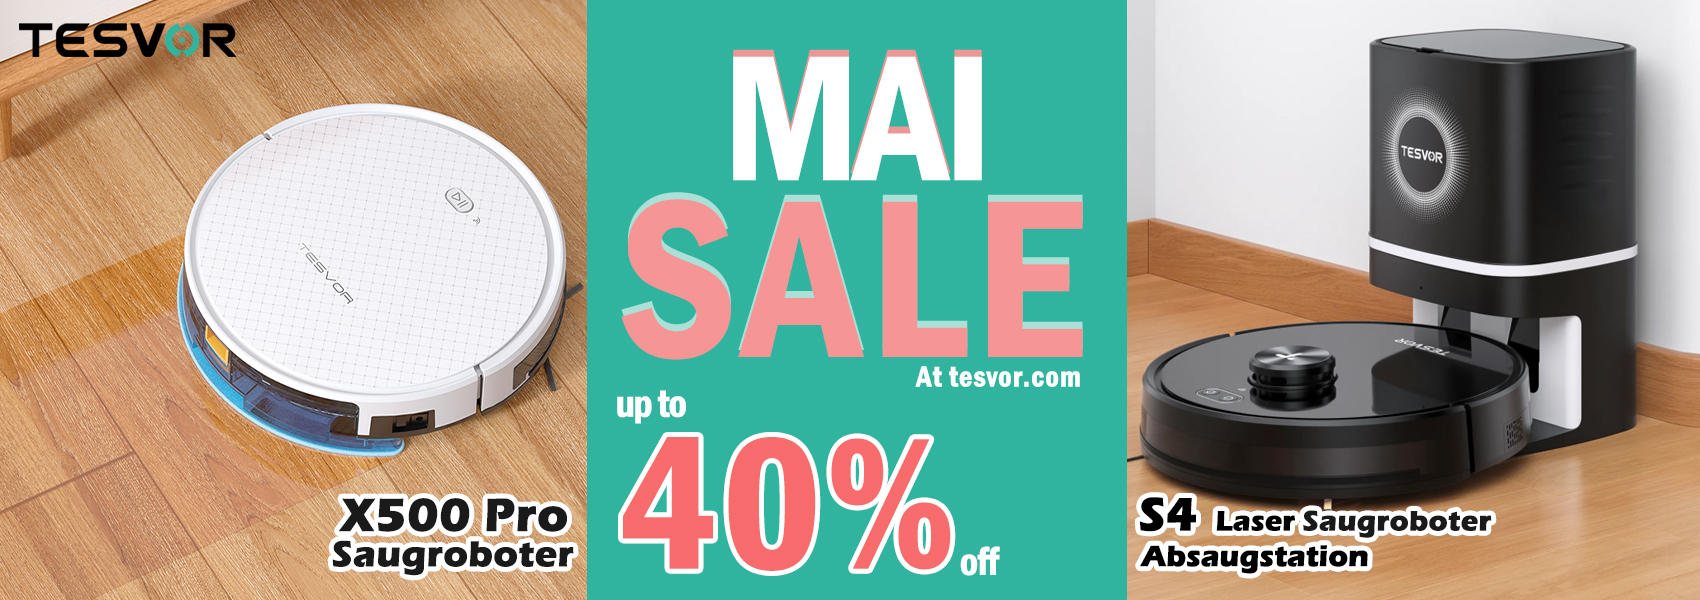 Get it or regret it: Tesvor may Sale, up to 39% off to get a best seller robot vacuum